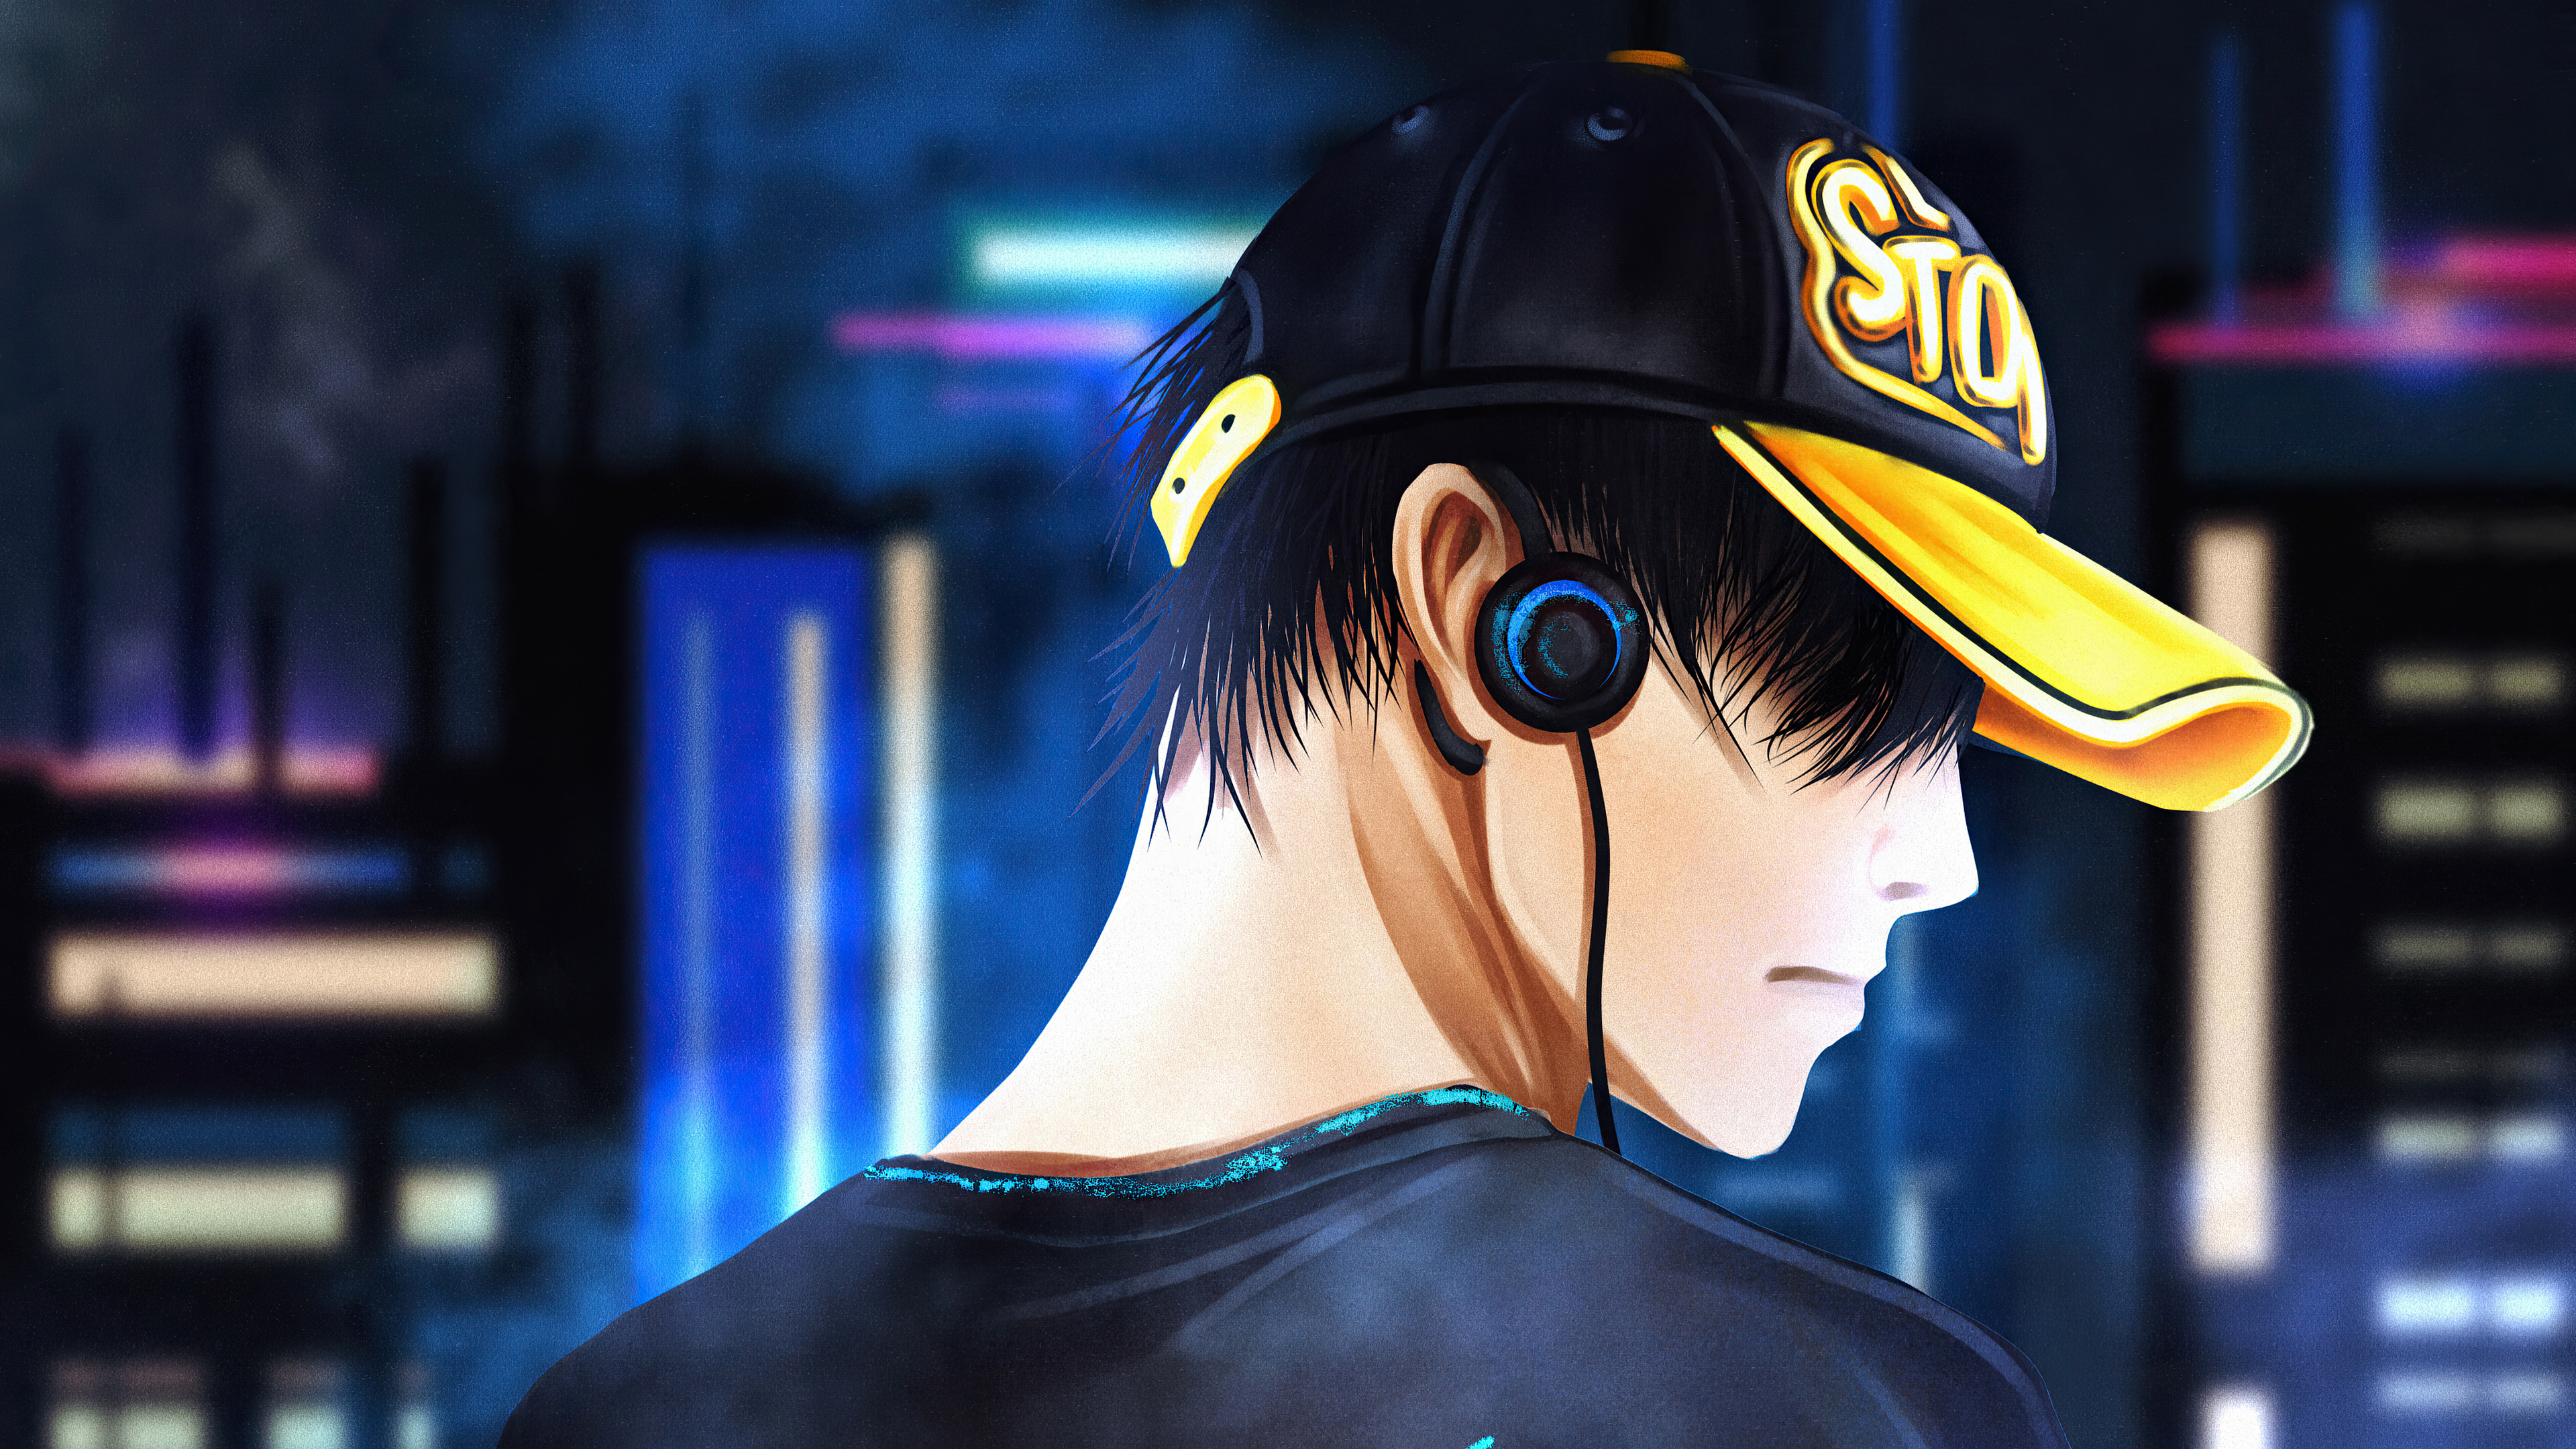 Anime Boys With Cap Wallpapers